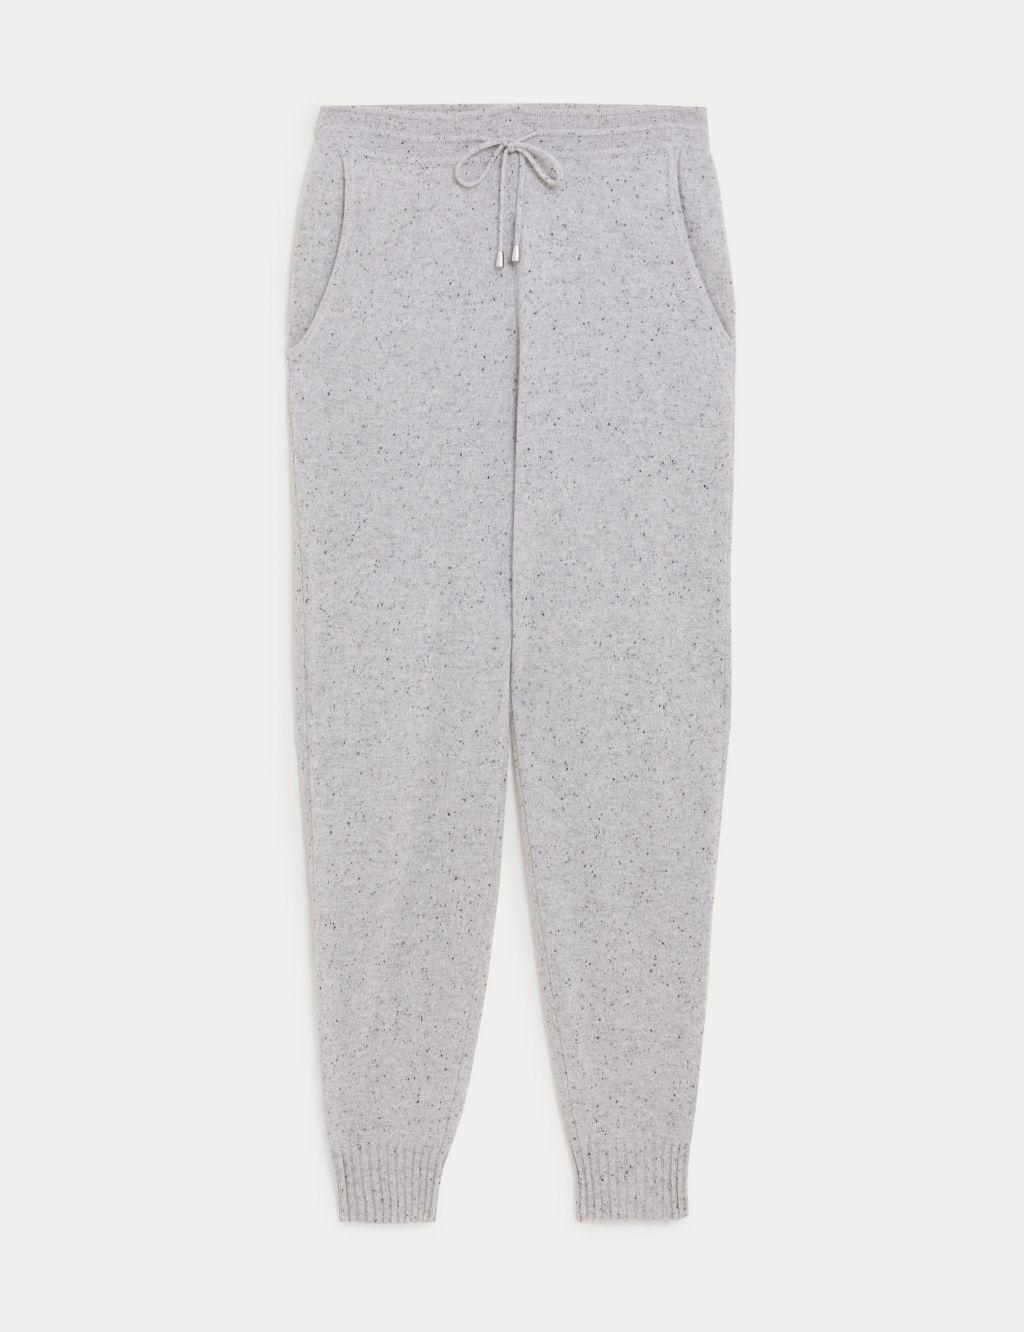 Pure Cashmere Textured Joggers image 1